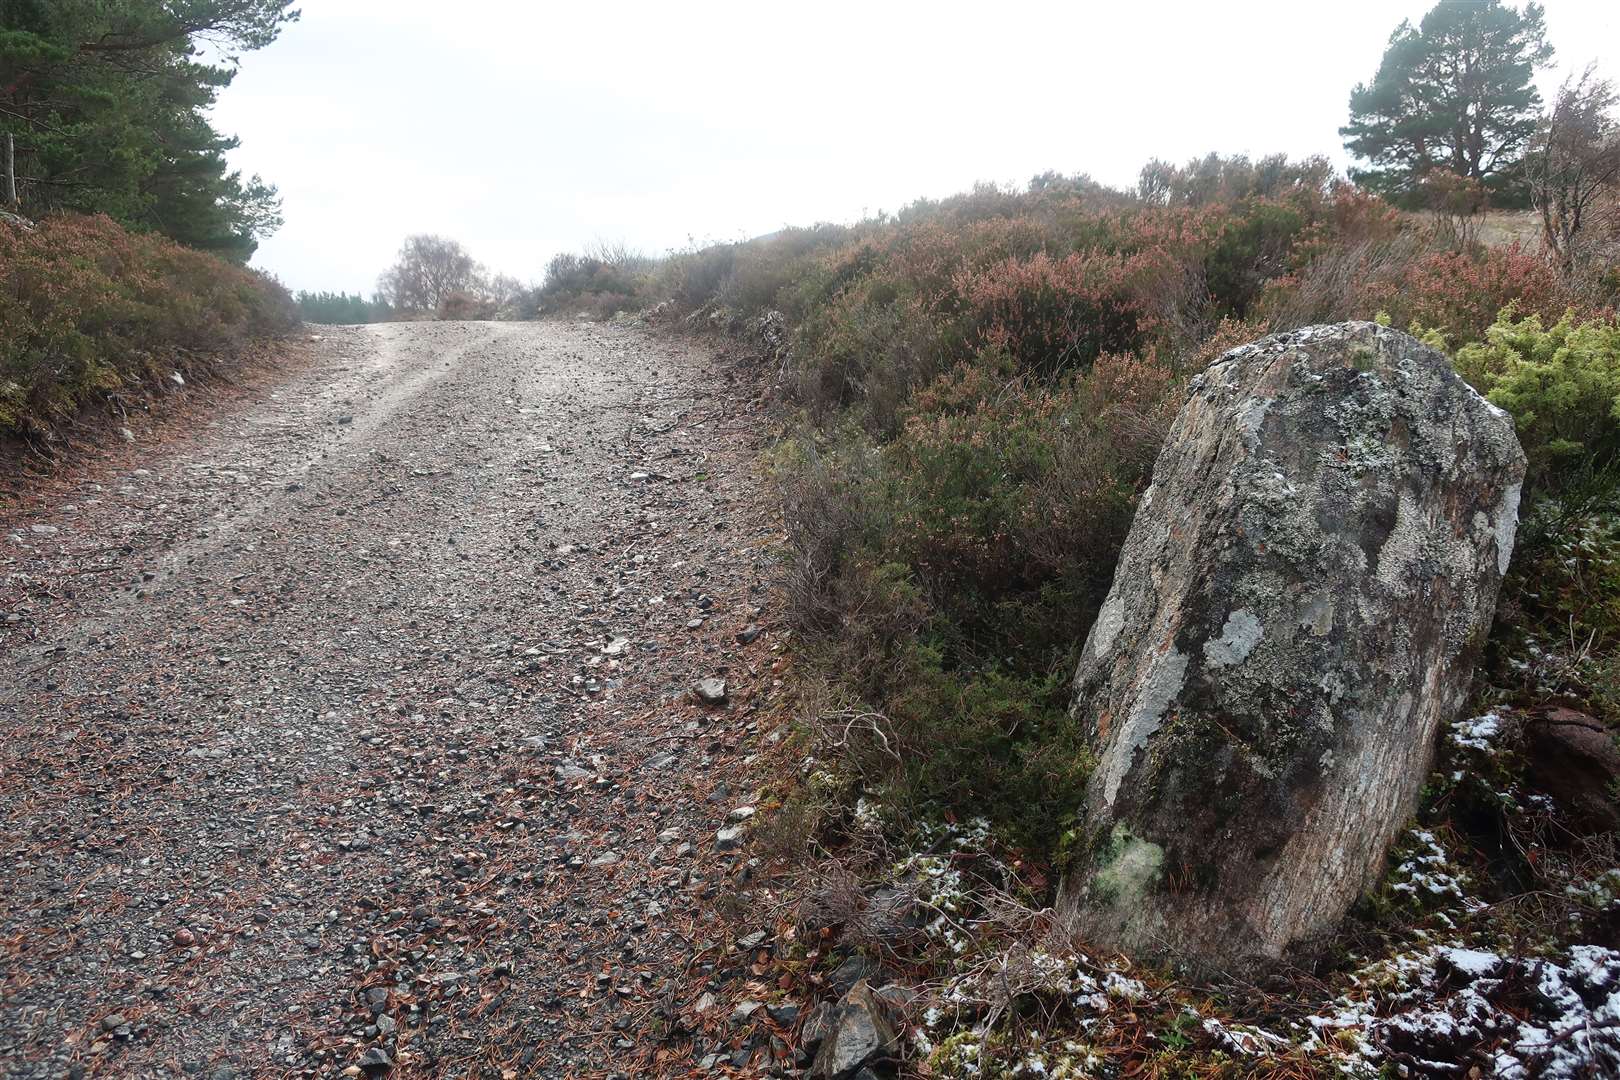 A possible Wade marker stone on the route near Brackletter.